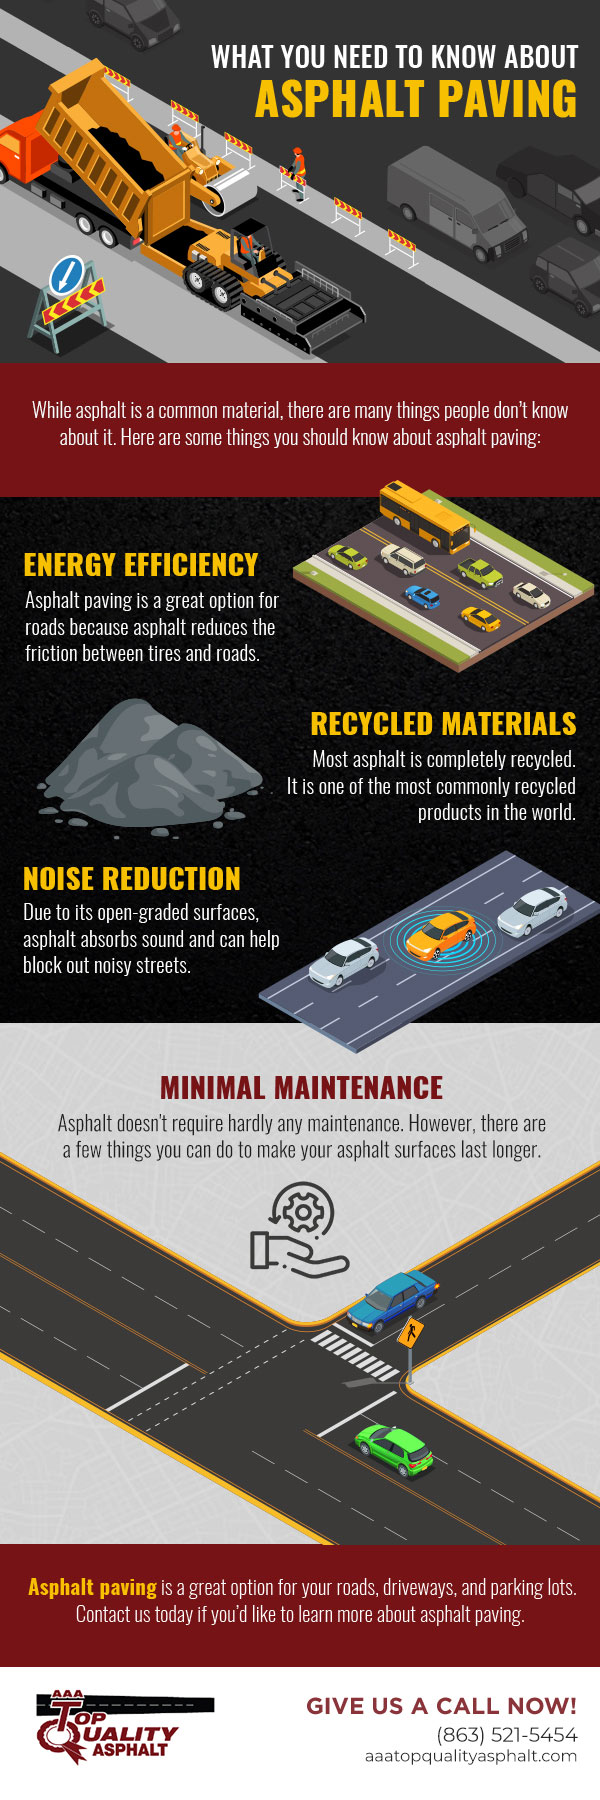 What You Need to Know About Asphalt Paving